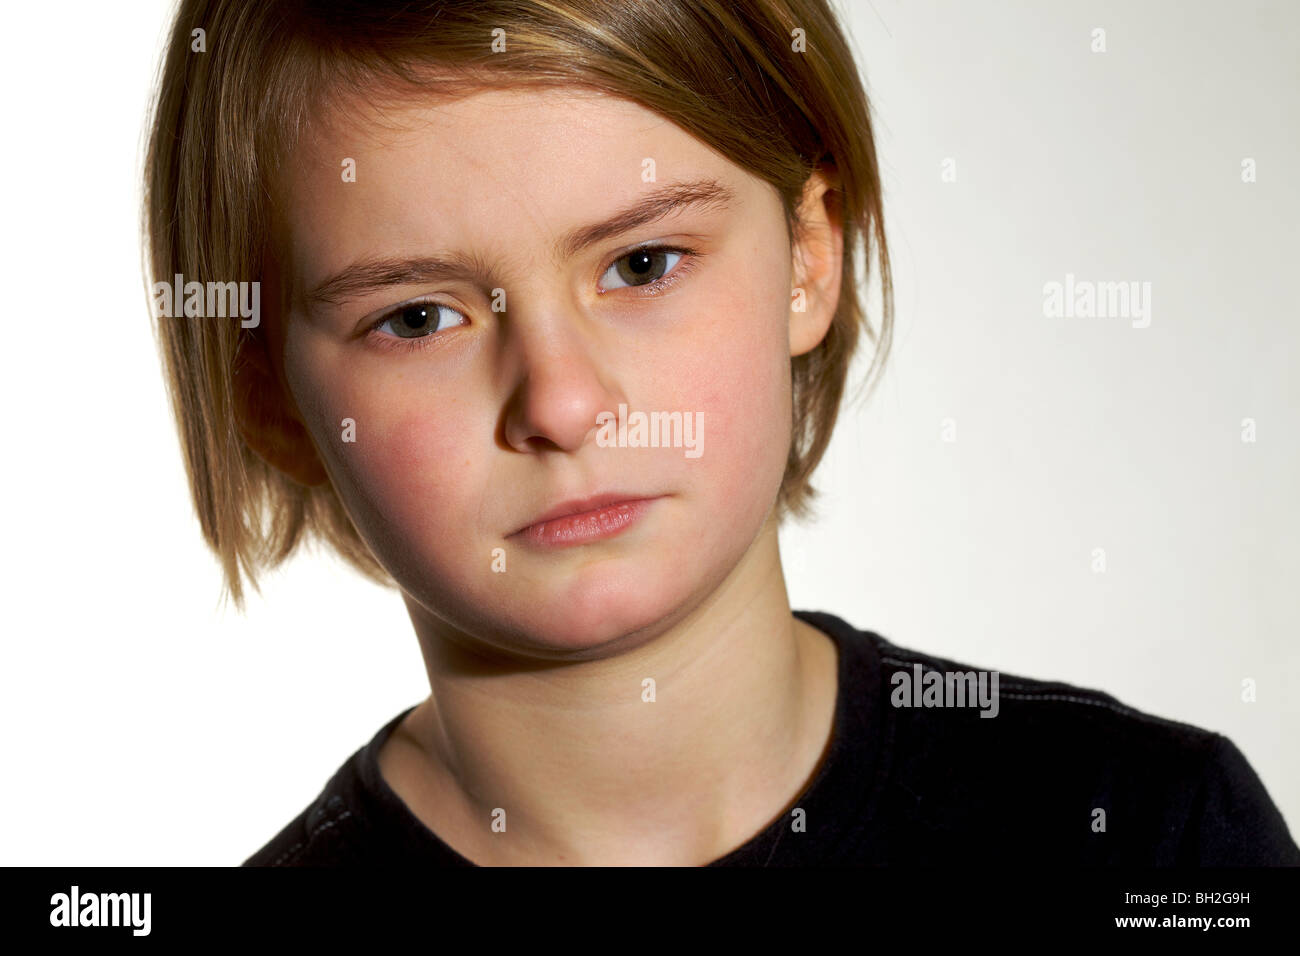 Young girl smiling angry sad expression facepull emotion bored grunge Stock Photo